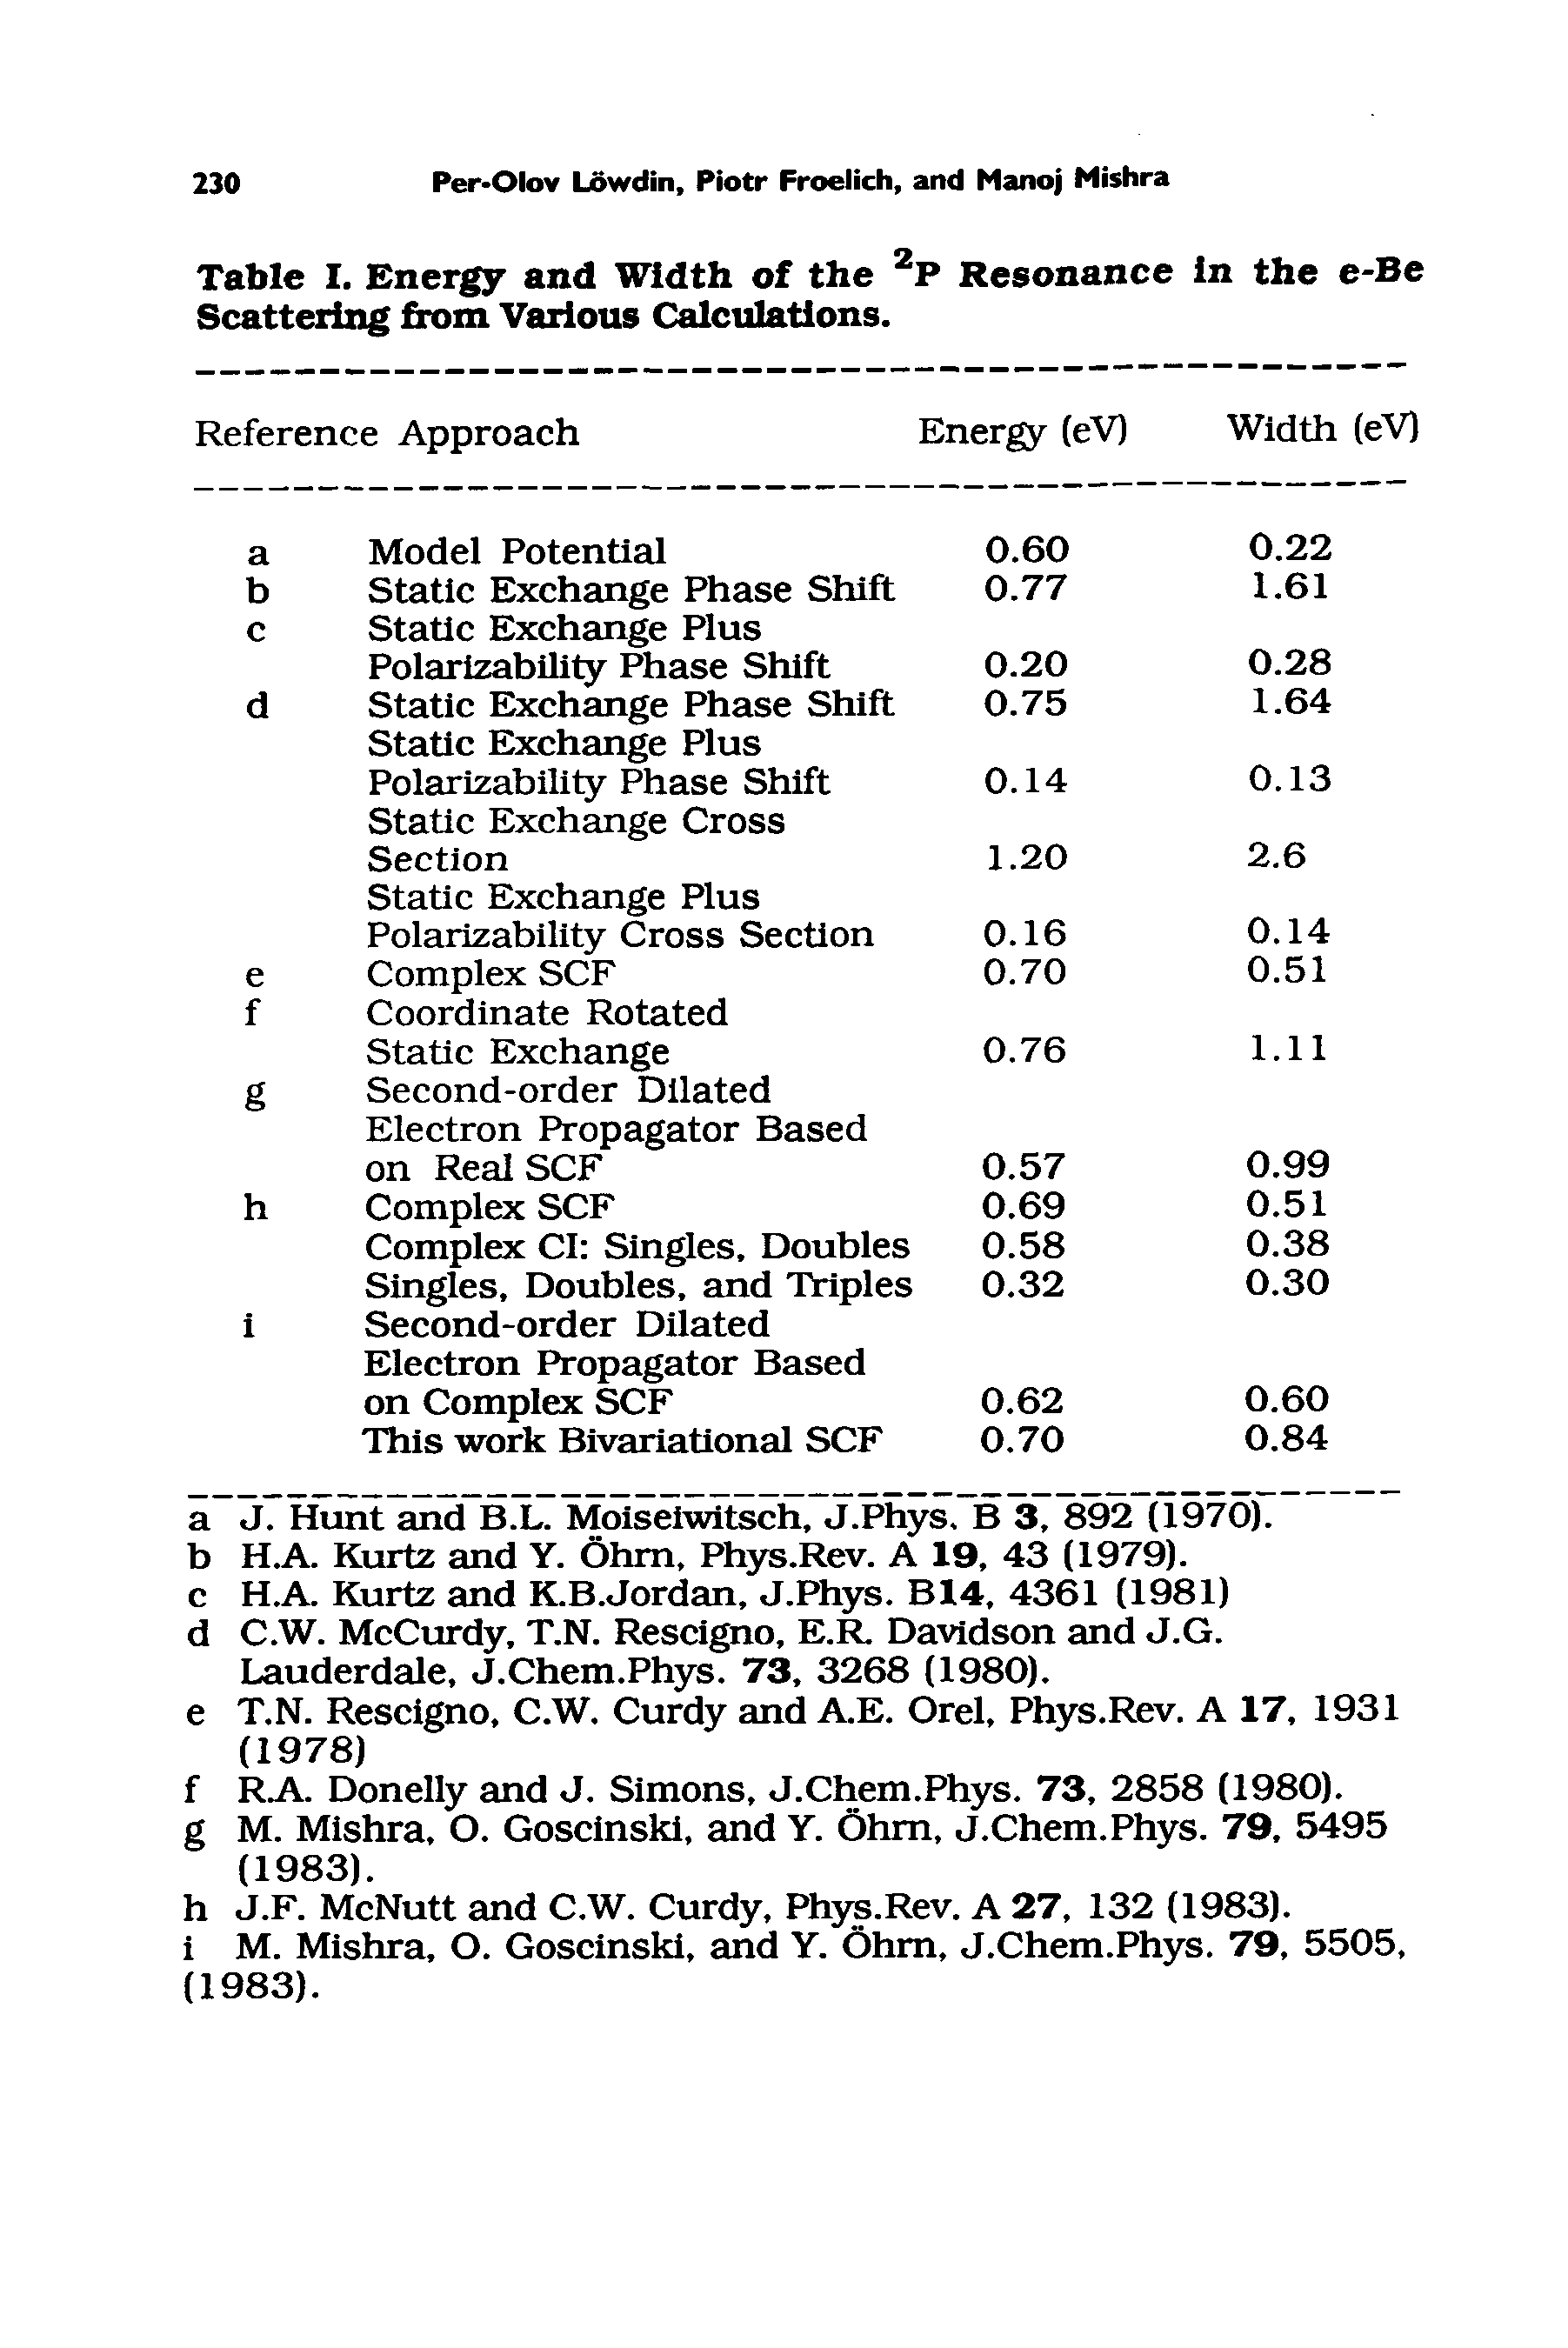 Table I. Energy and Width of the 2P Resonance in the e-Be Scattering from Various Calculations.